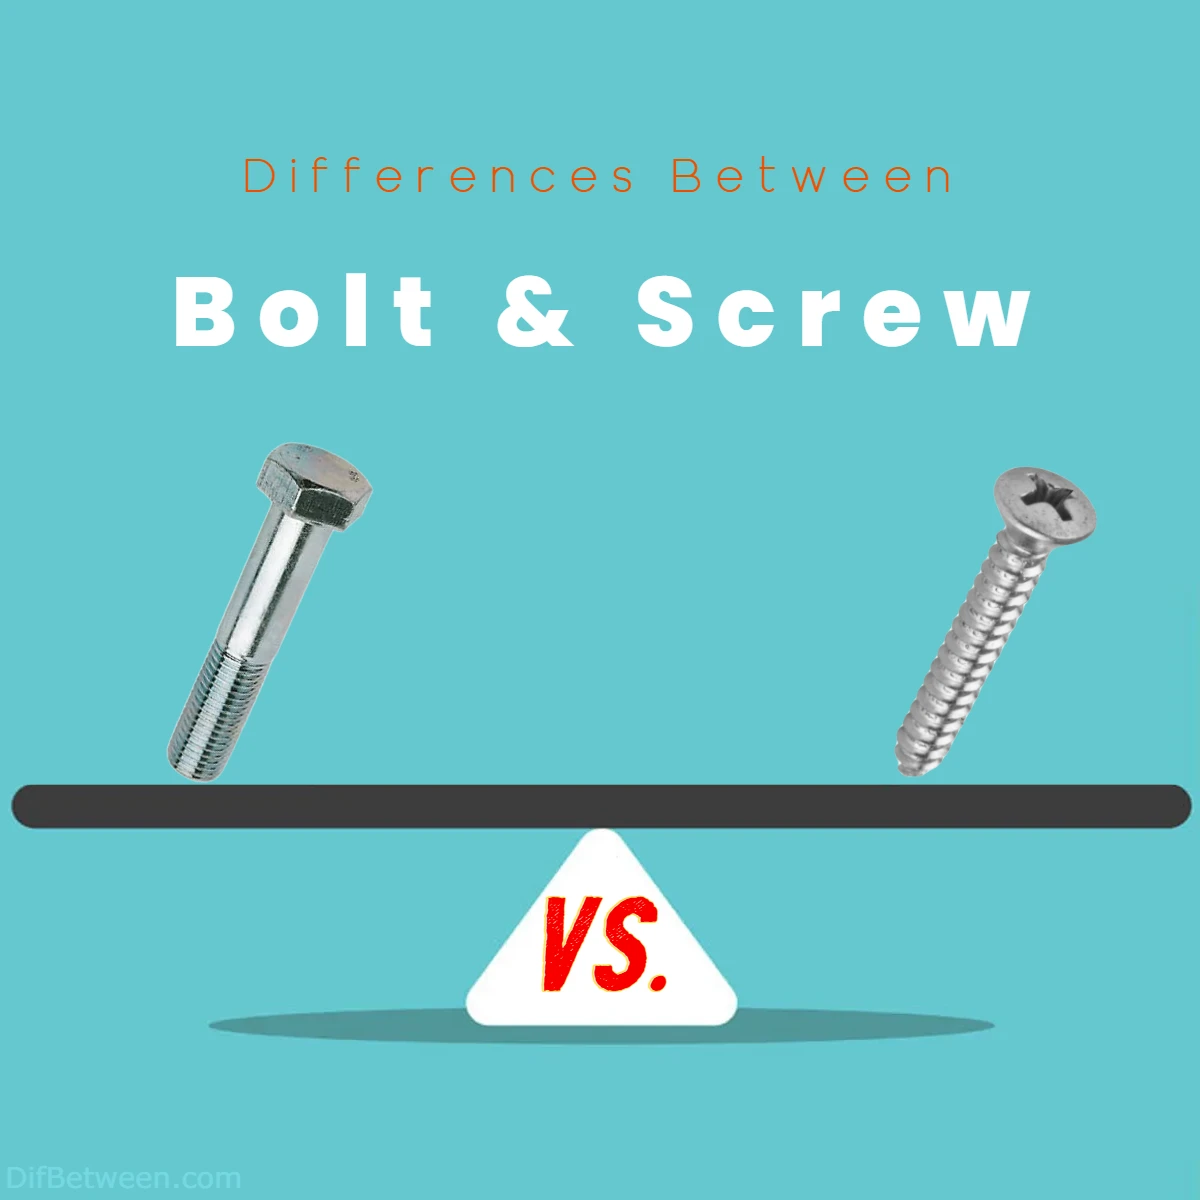 Differences Between Bolt and Screw